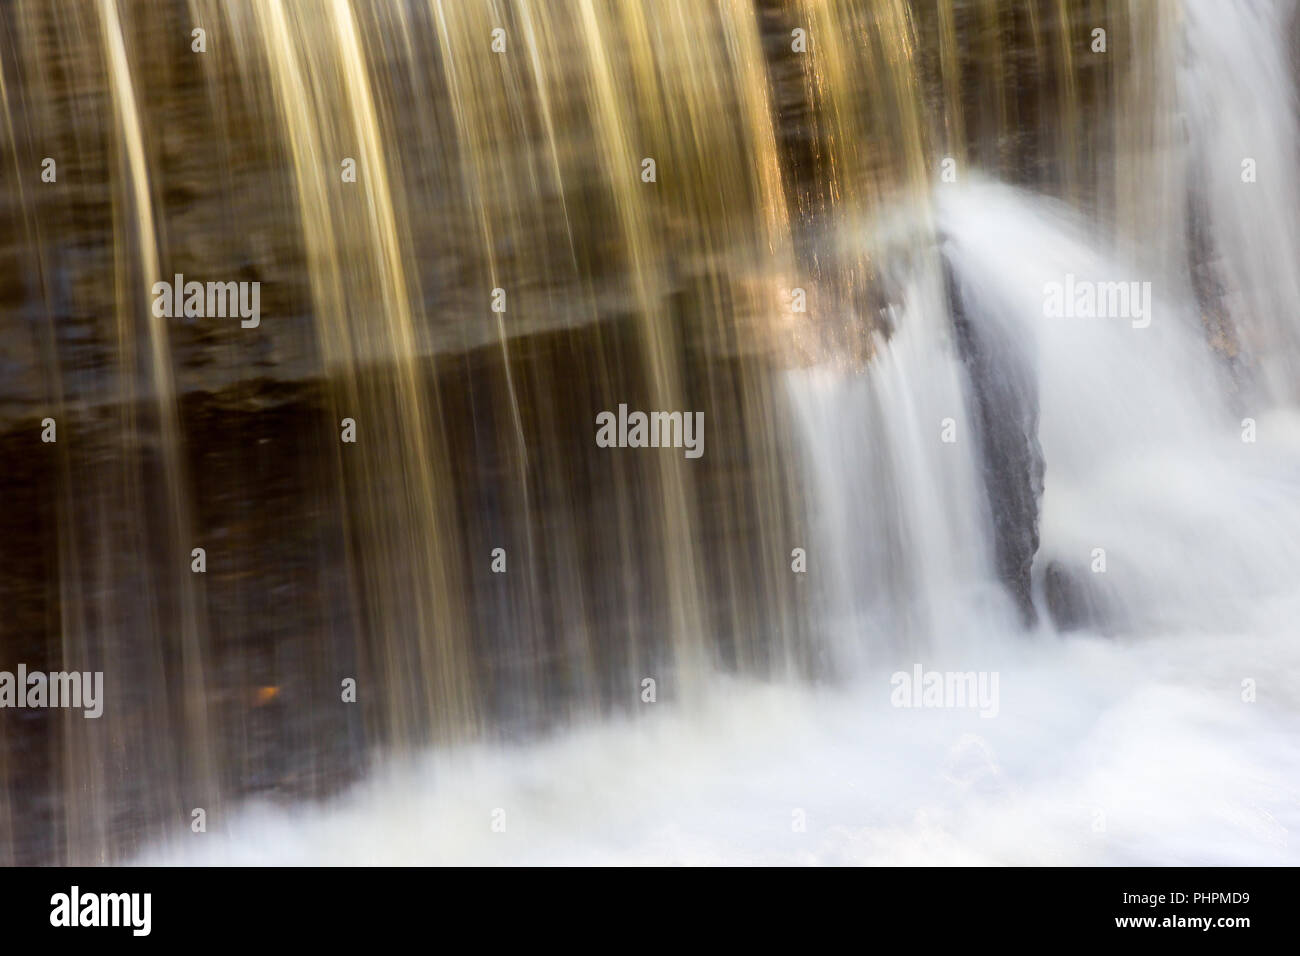 Abstract Gold colored waterfall Stock Photo